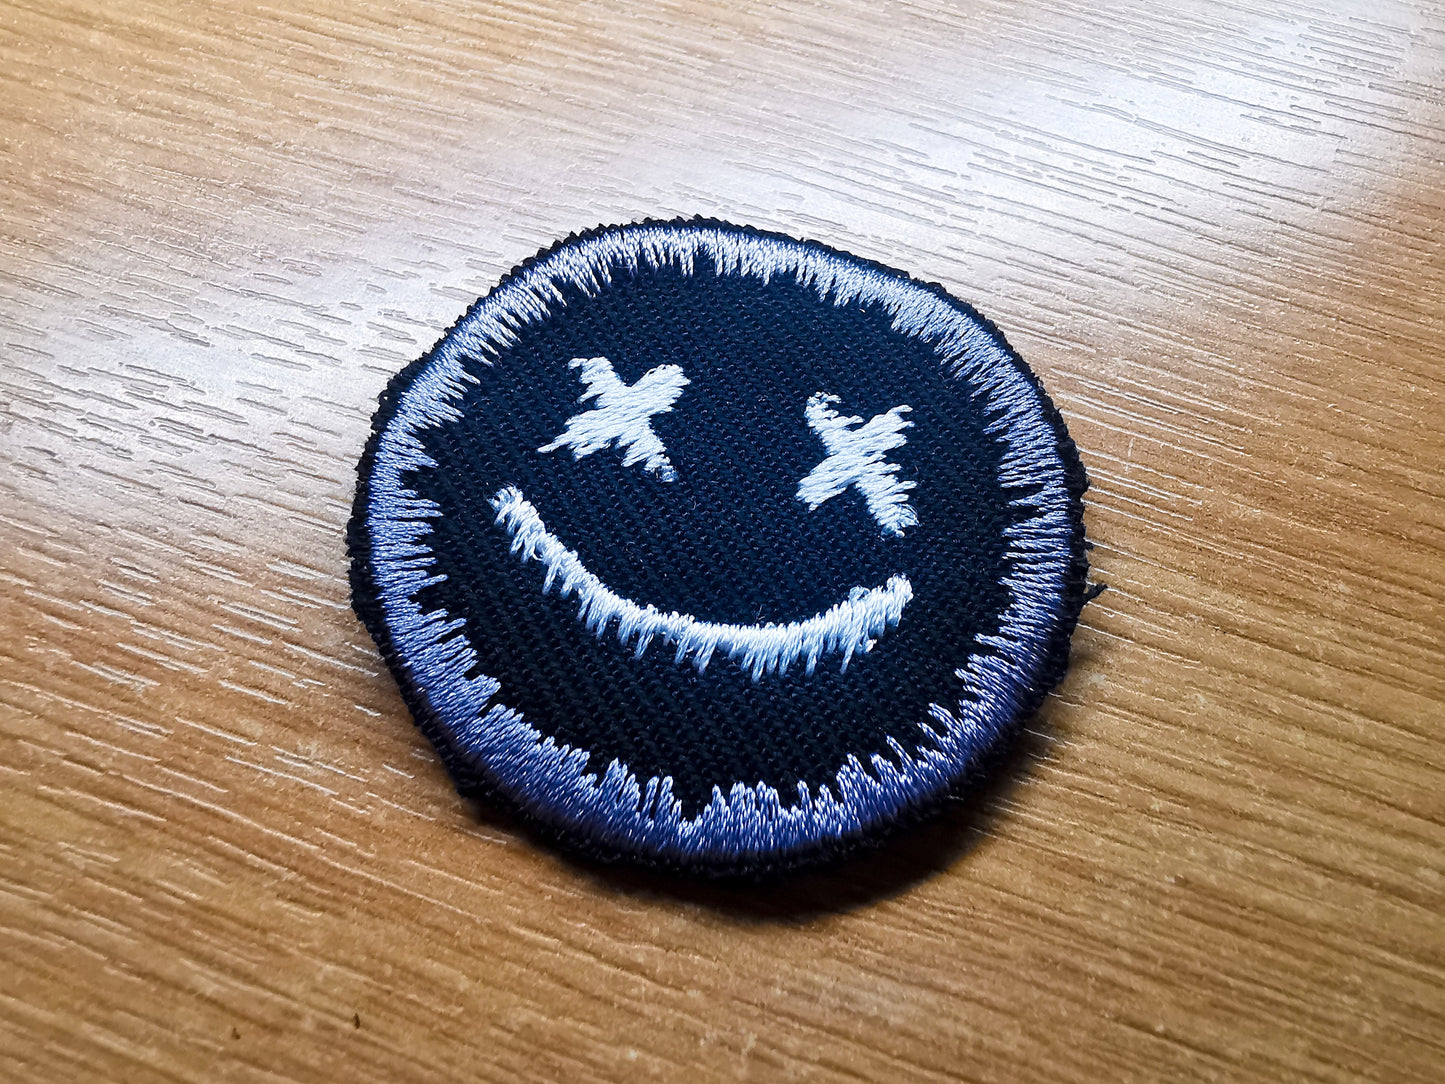 Dripping Face Iron On Embroidered Patch Pop Punk Skater Alternative Gothic Metal Gift